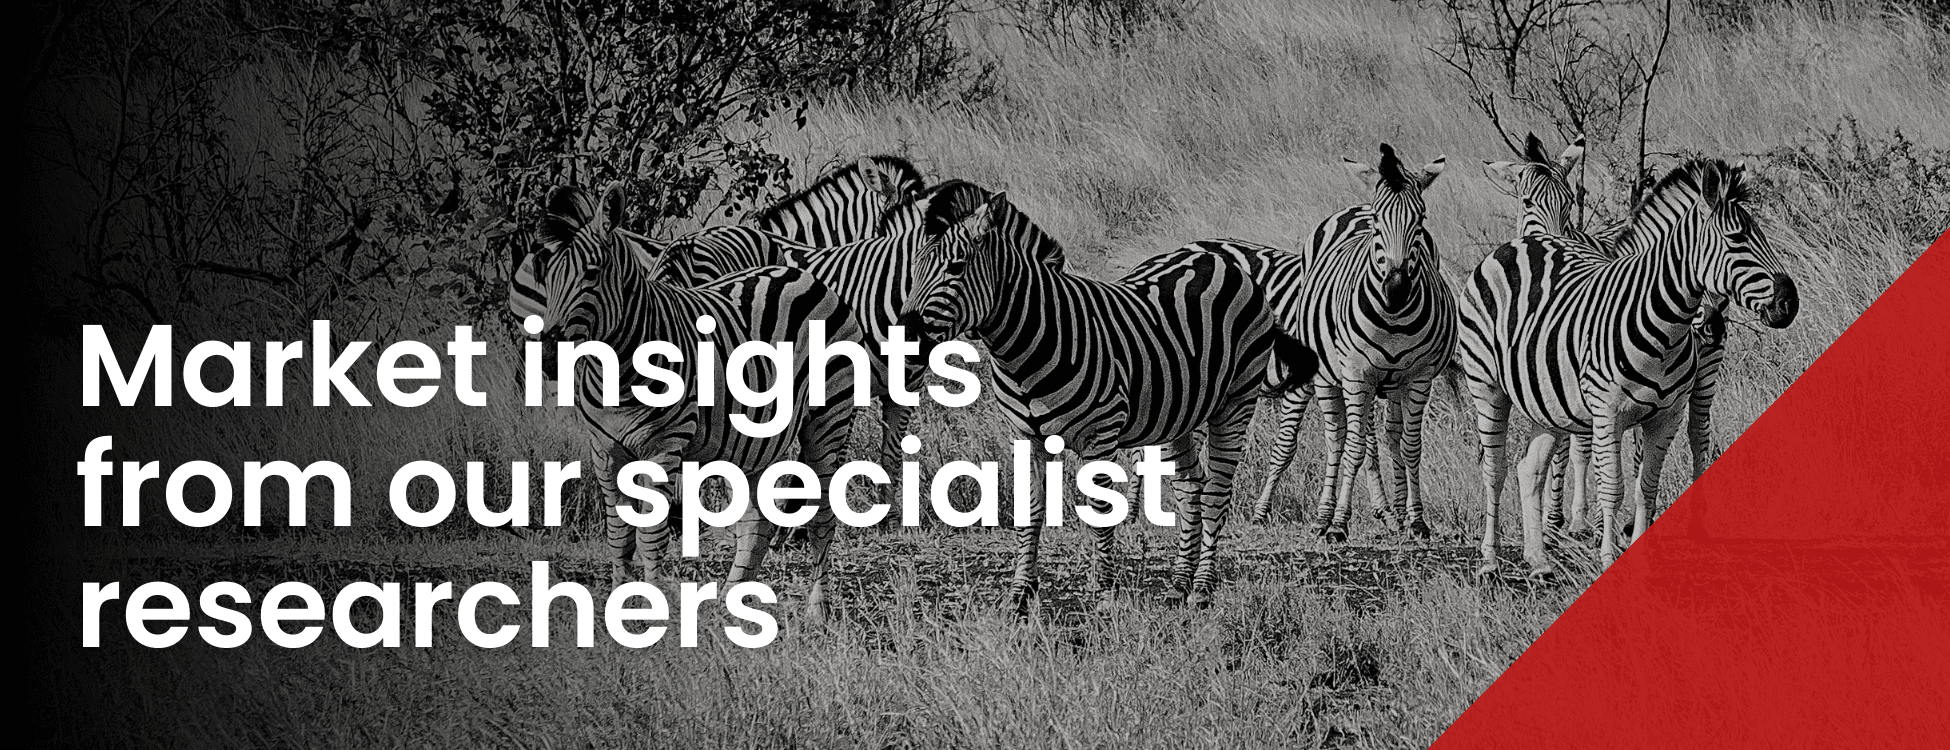 Market insights from our specialist researchers